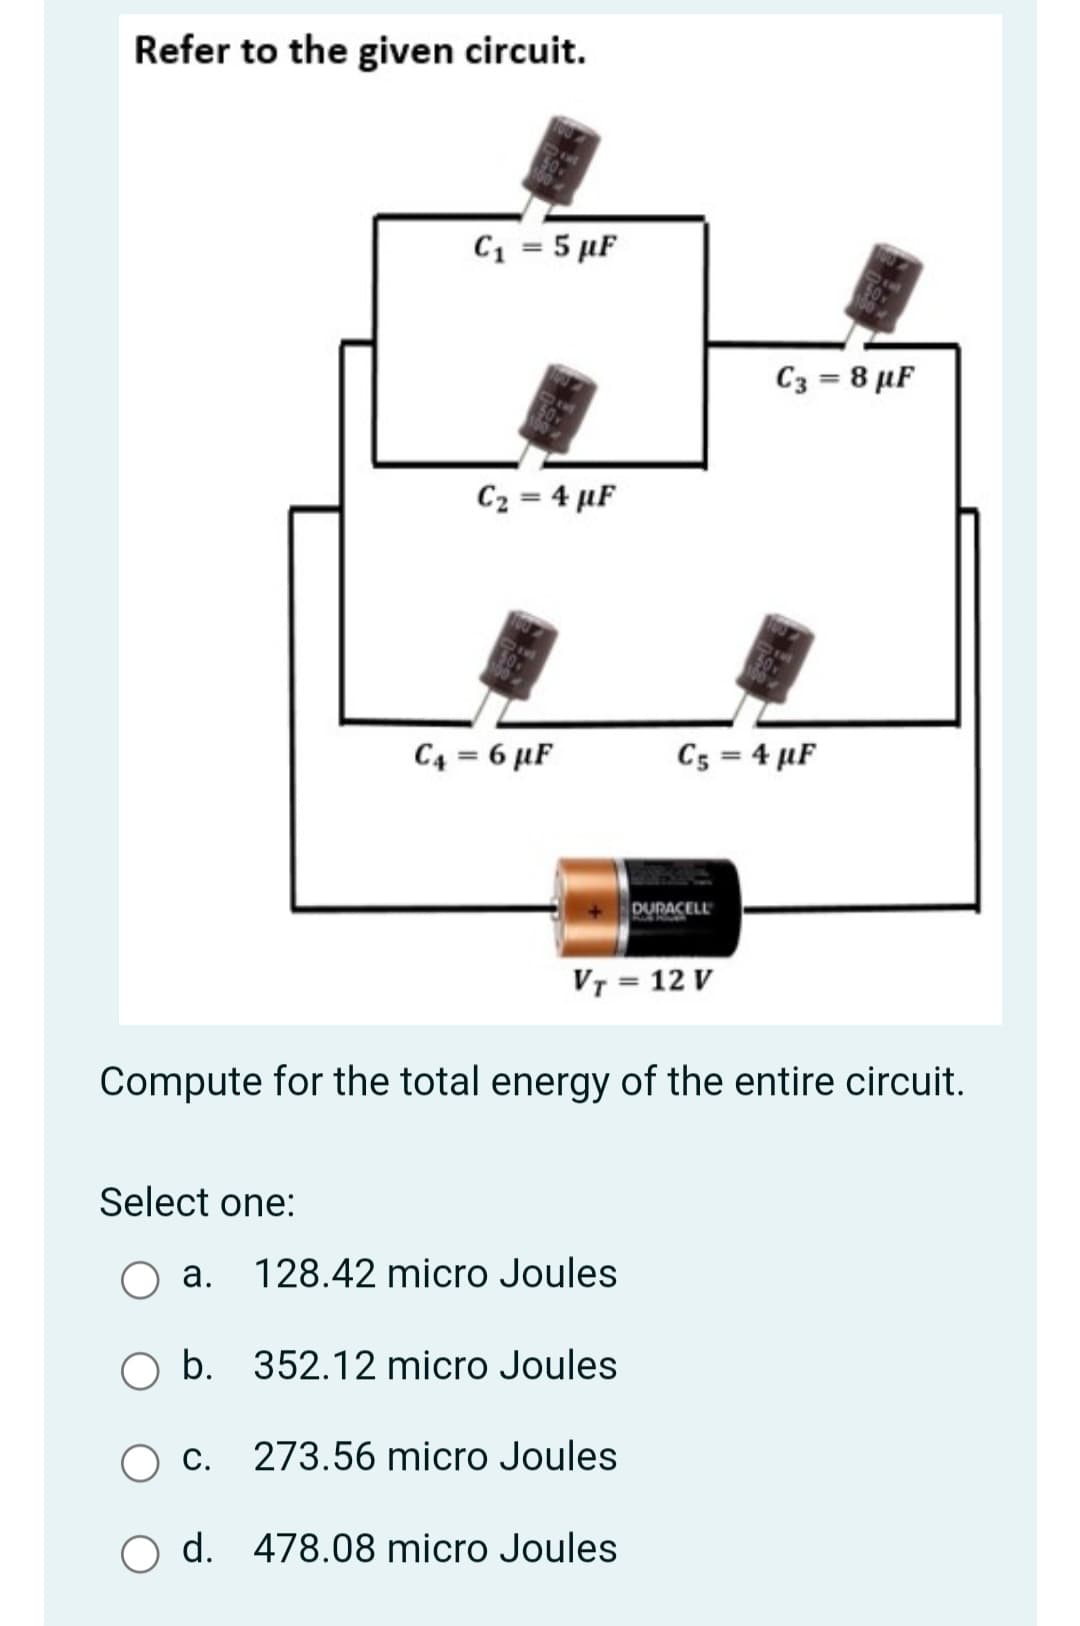 Refer to the given circuit.
C1 = 5 µF
C3 = 8 µF
C2 = 4 µF
C4 = 6 µF
Cs = 4 µF
DURACELL
VT = 12 V
Compute for the total energy of the entire circuit.
Select one:
a.
128.42 micro Joules
O b. 352.12 micro Joules
О.
273.56 micro Joules
O d. 478.08 micro Joules
